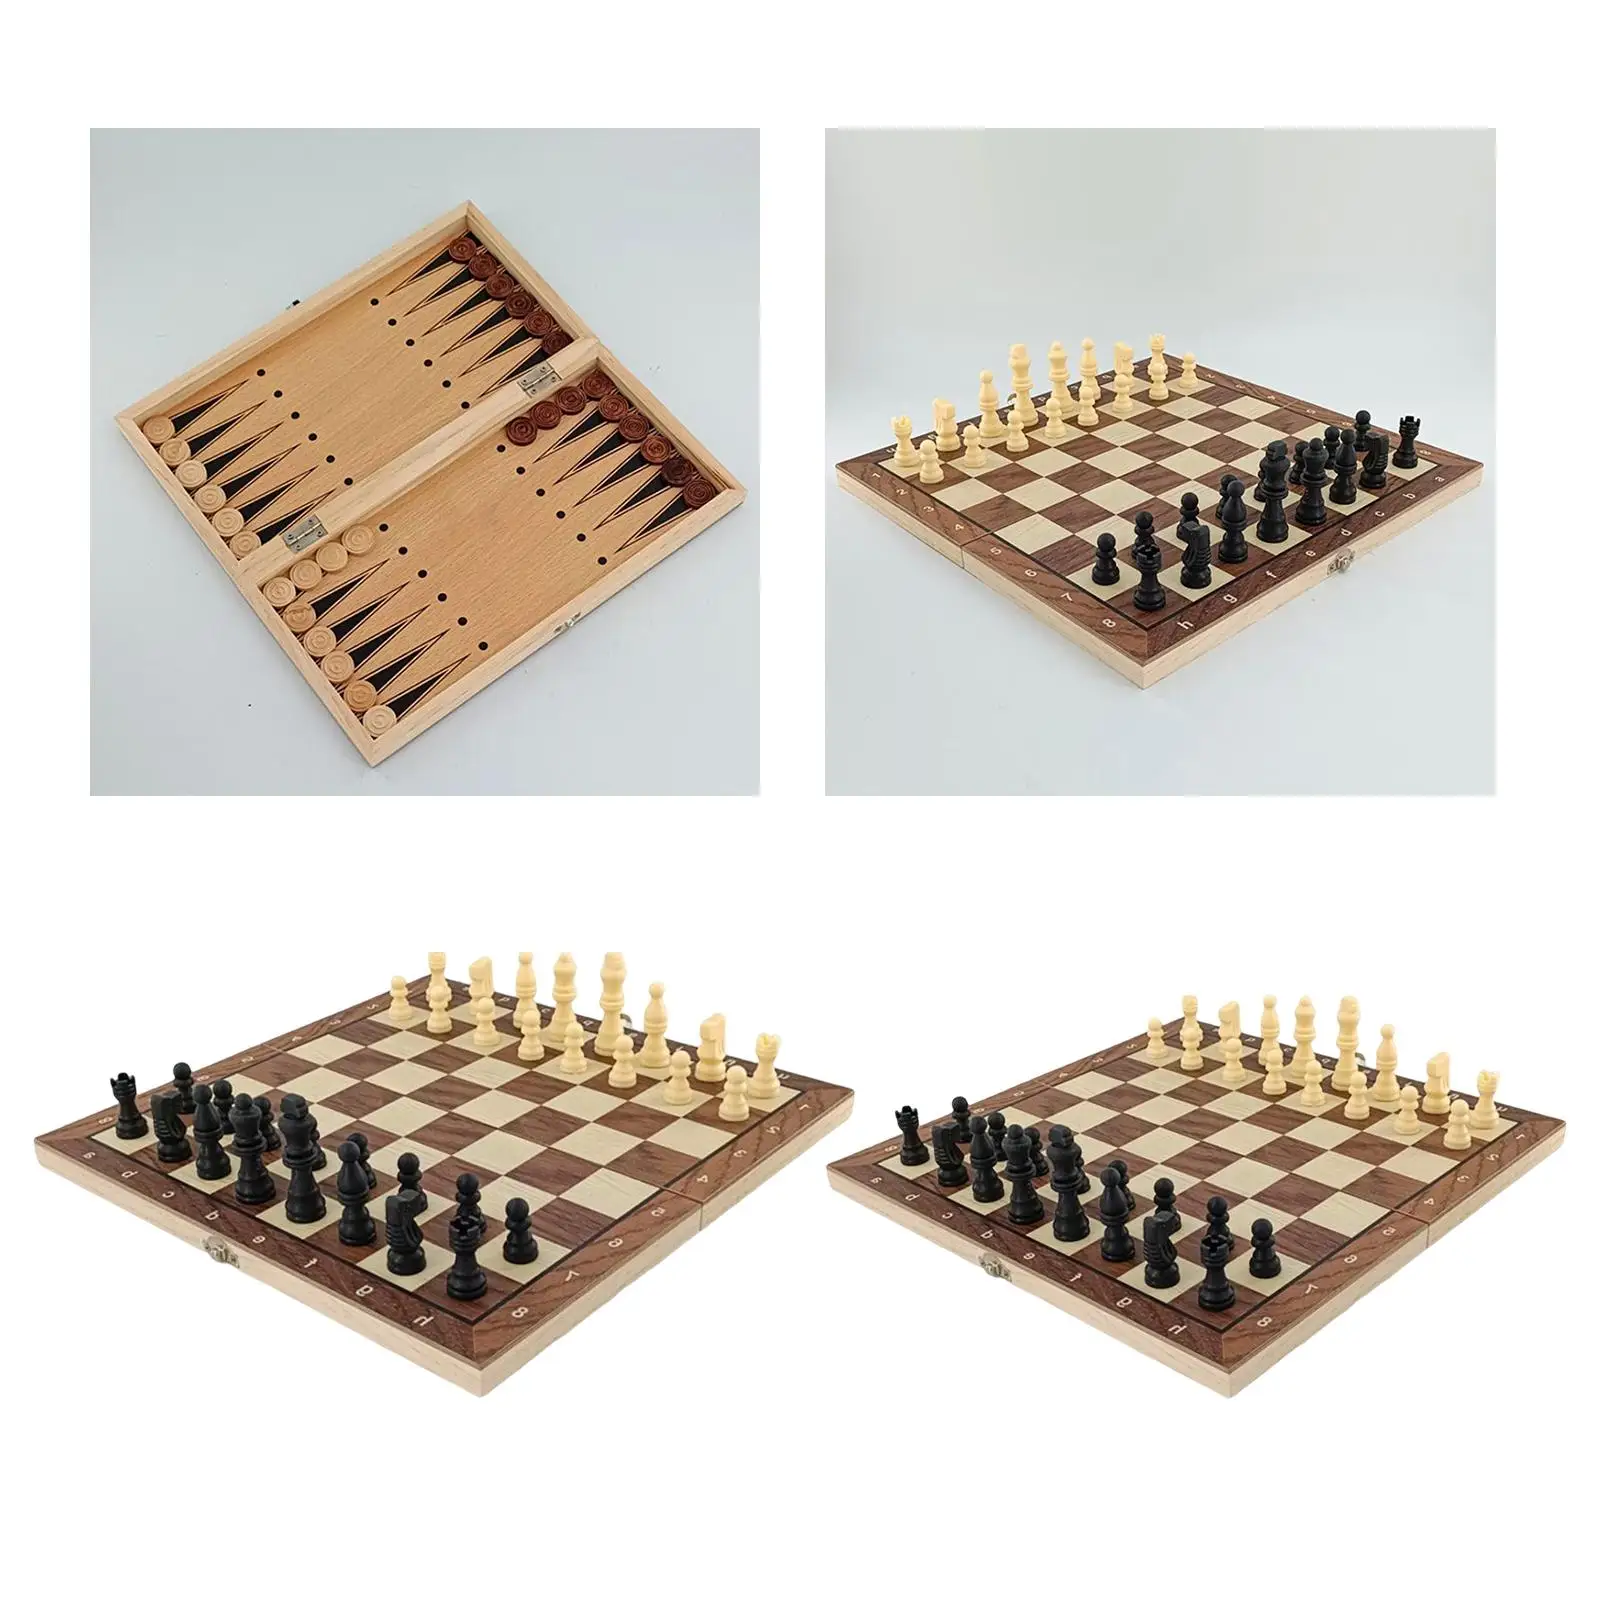 Portable Travel Games Chess Set Entertainment Toys,Chessboard Board Game,Wooden